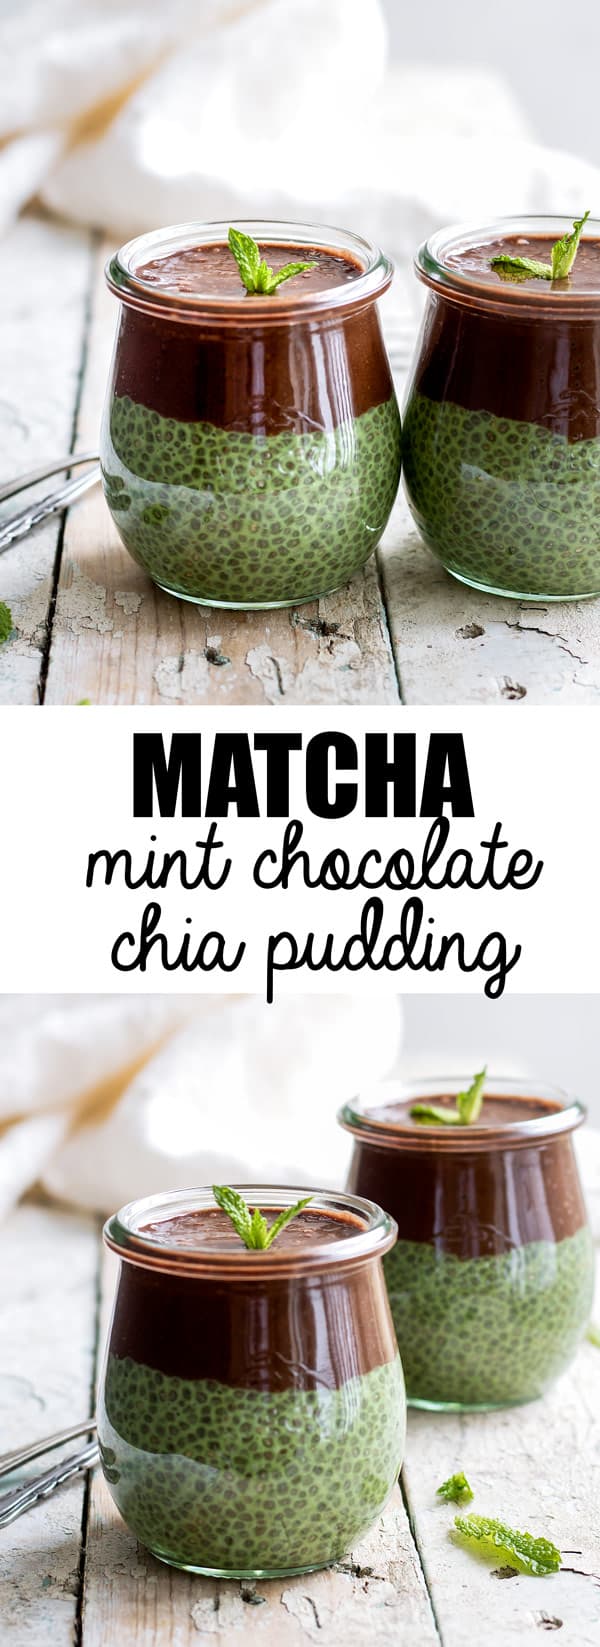 This matcha mint chocolate chia pudding is a healthy recipe that is loaded with good for you matcha powder! Enjoy it for breakfast, a snack or dessert!